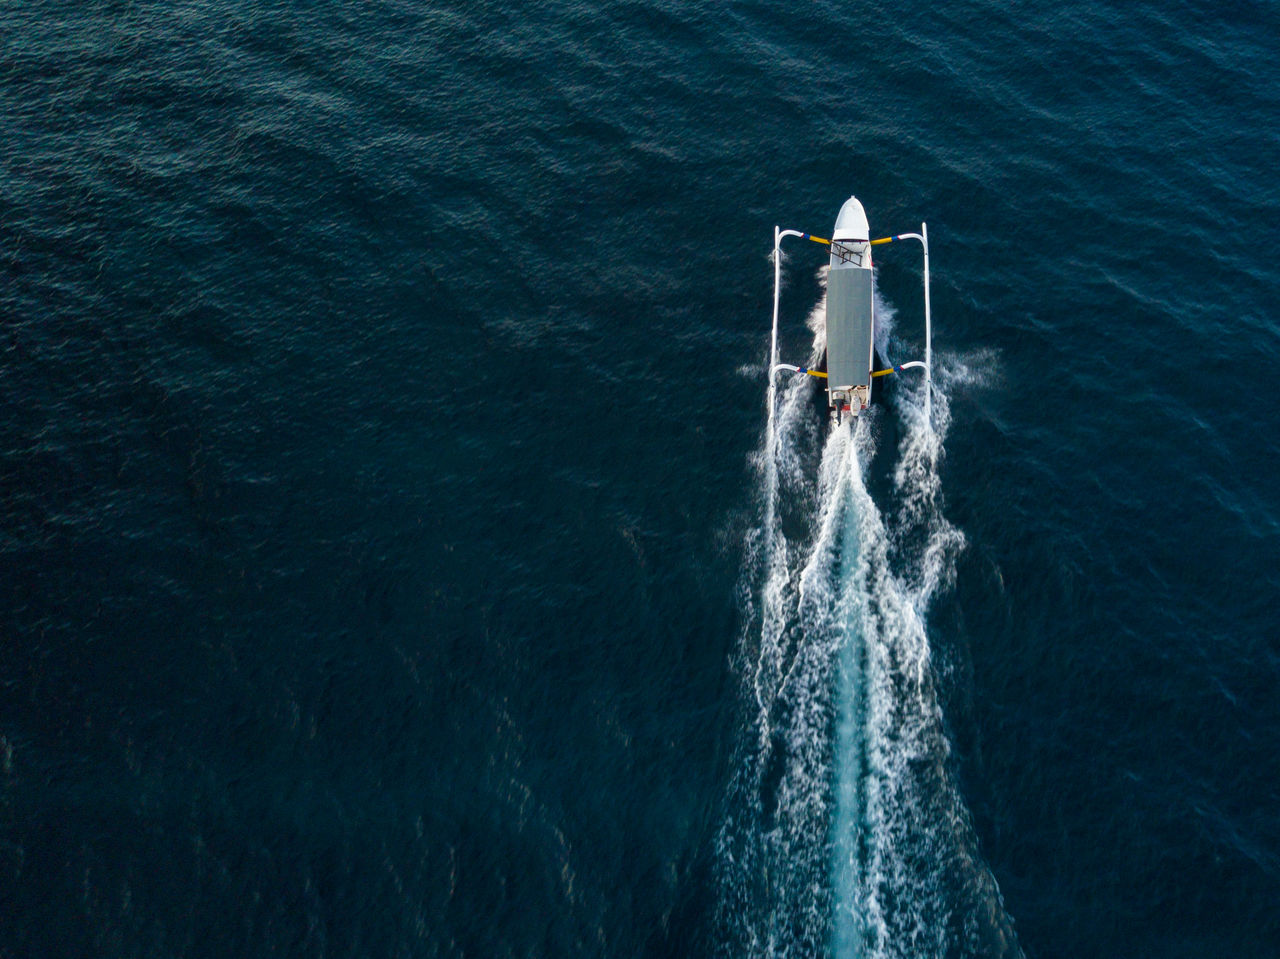 Aerial view of outrigger sailing on sea